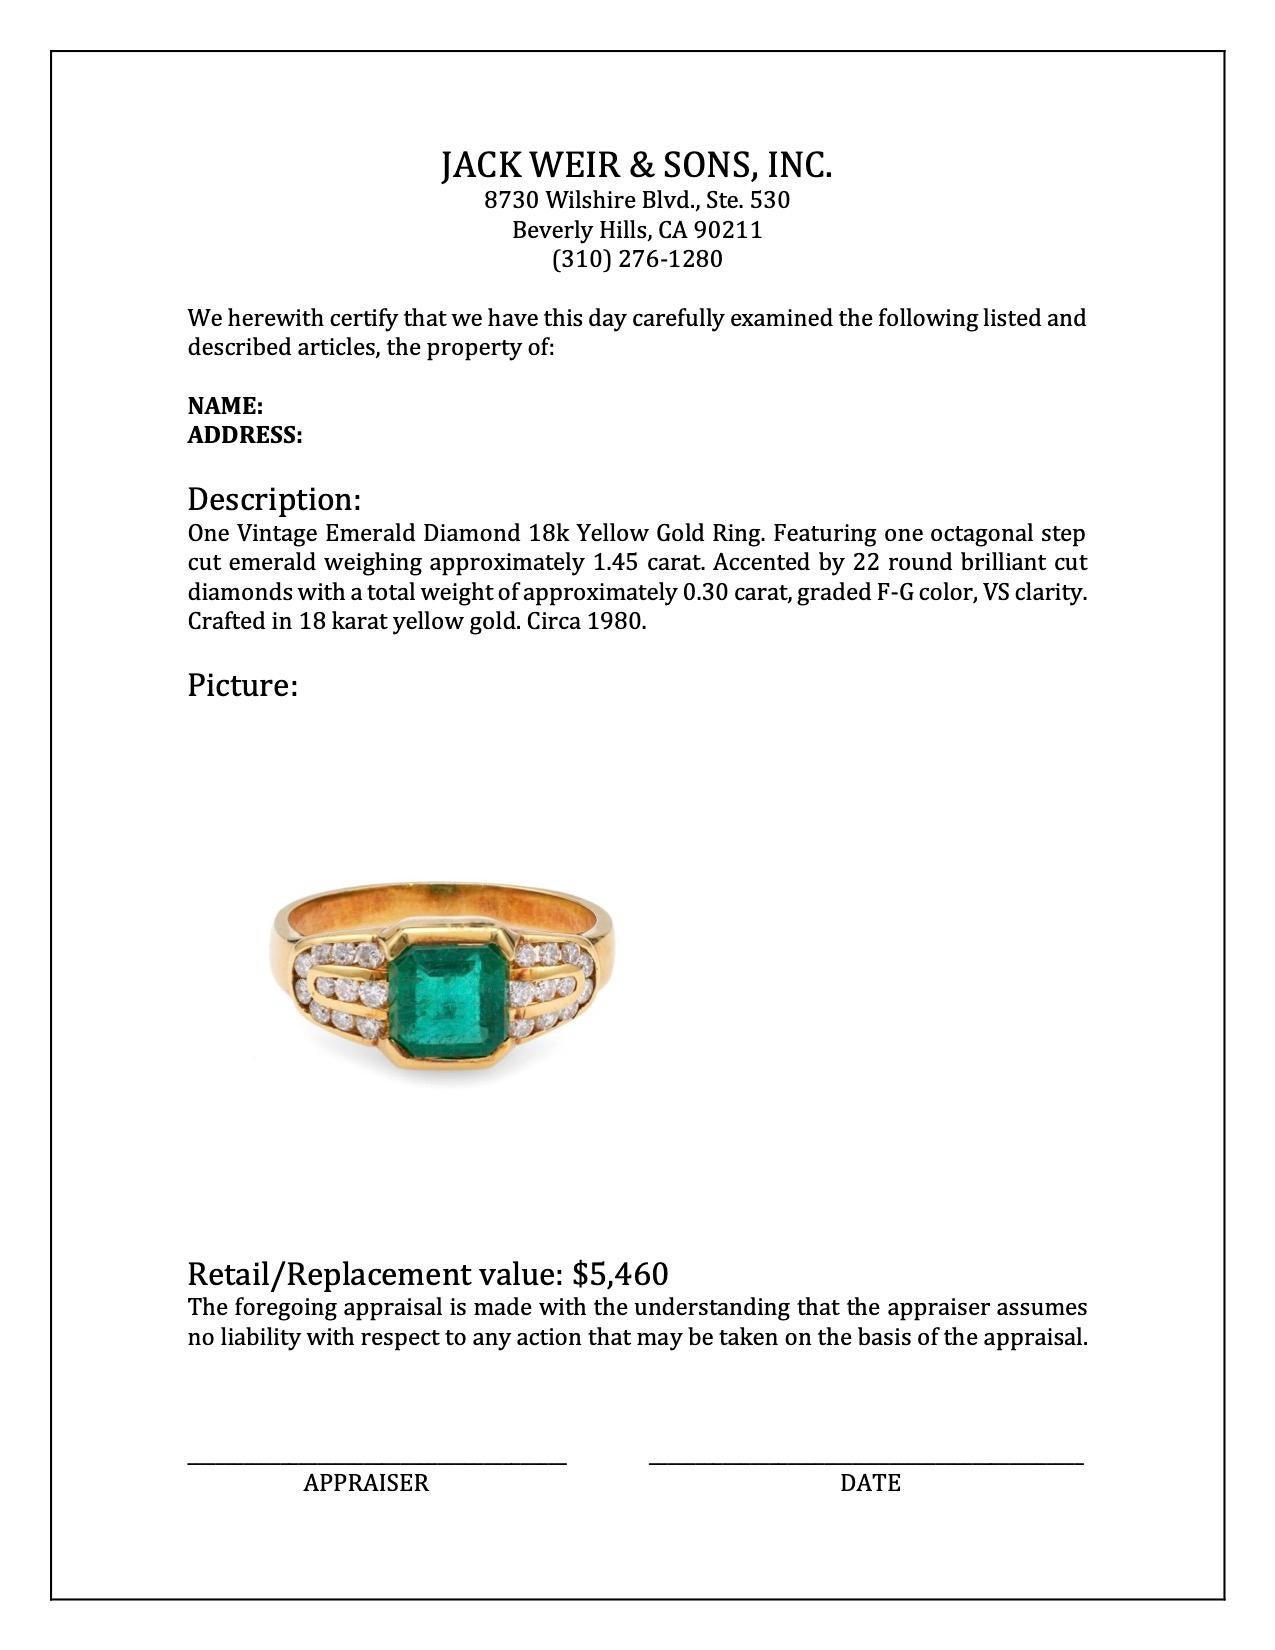 Vintage Emerald Diamond 18k Yellow Gold Ring For Sale 1